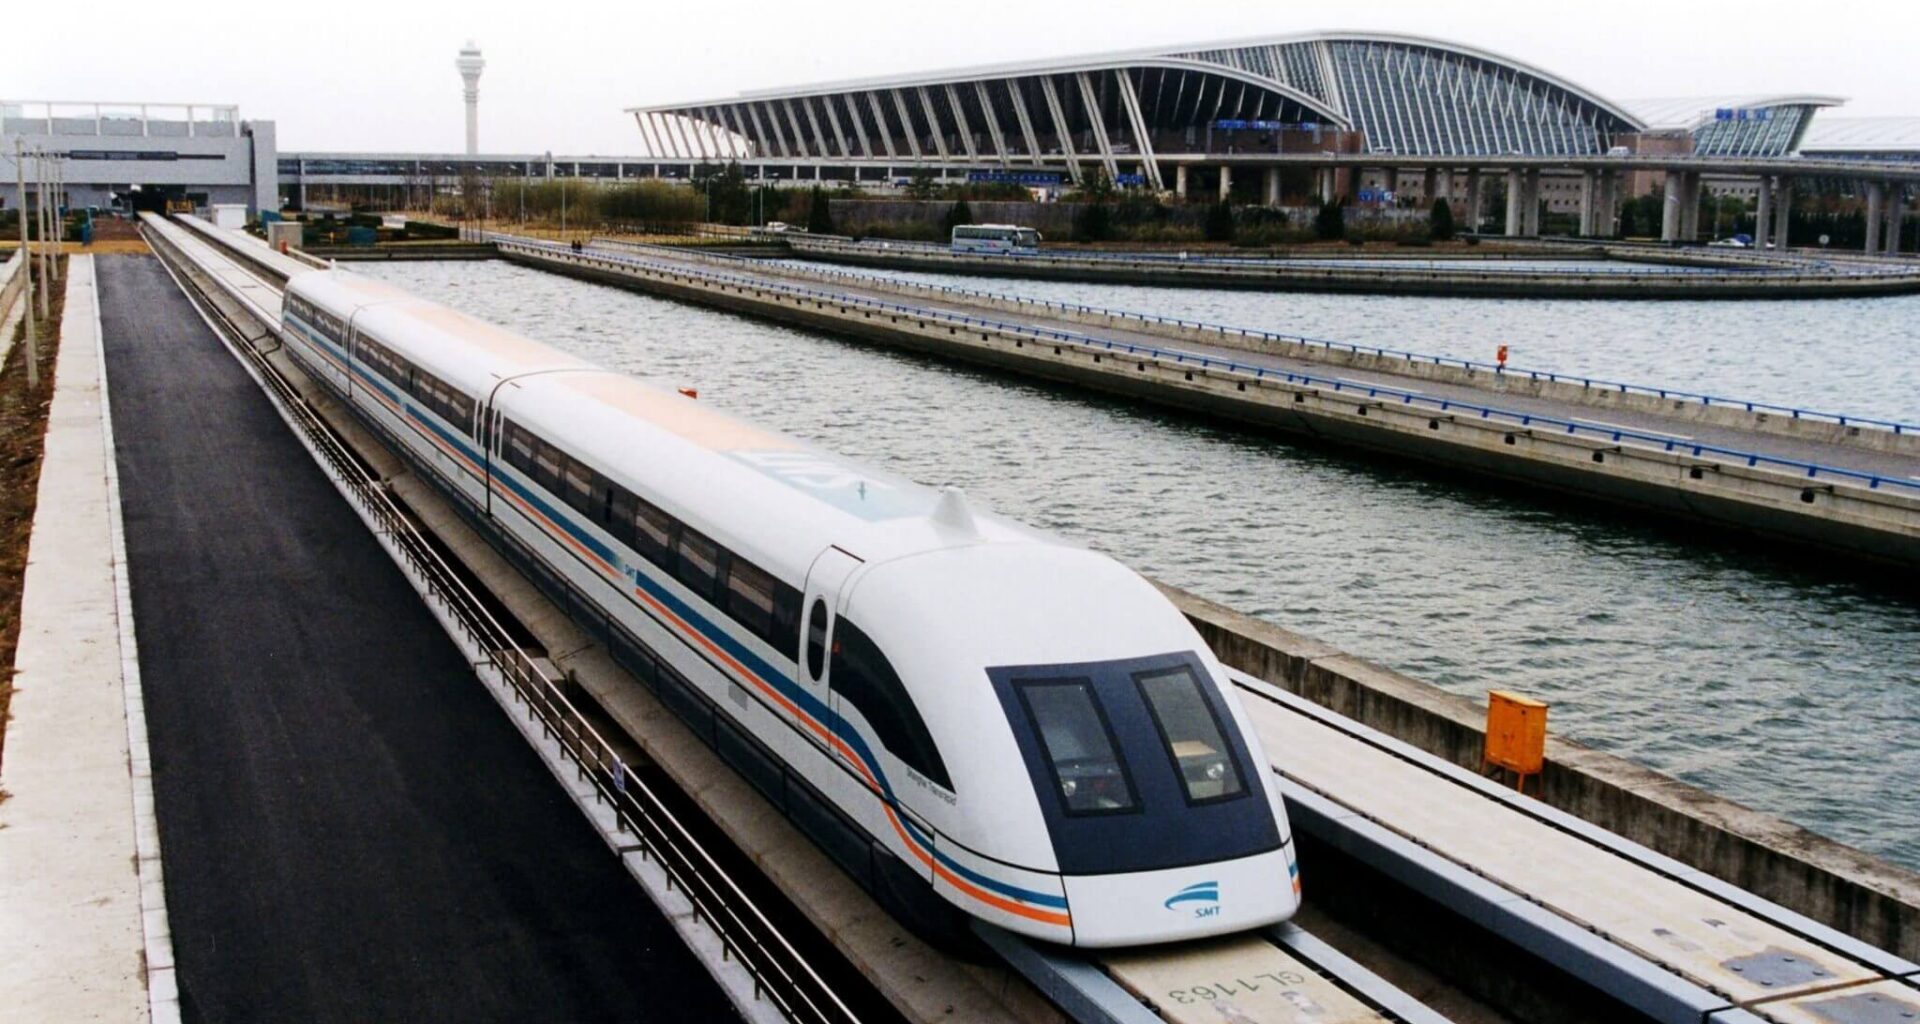 A maglev train coming out pudong international airport shanghai